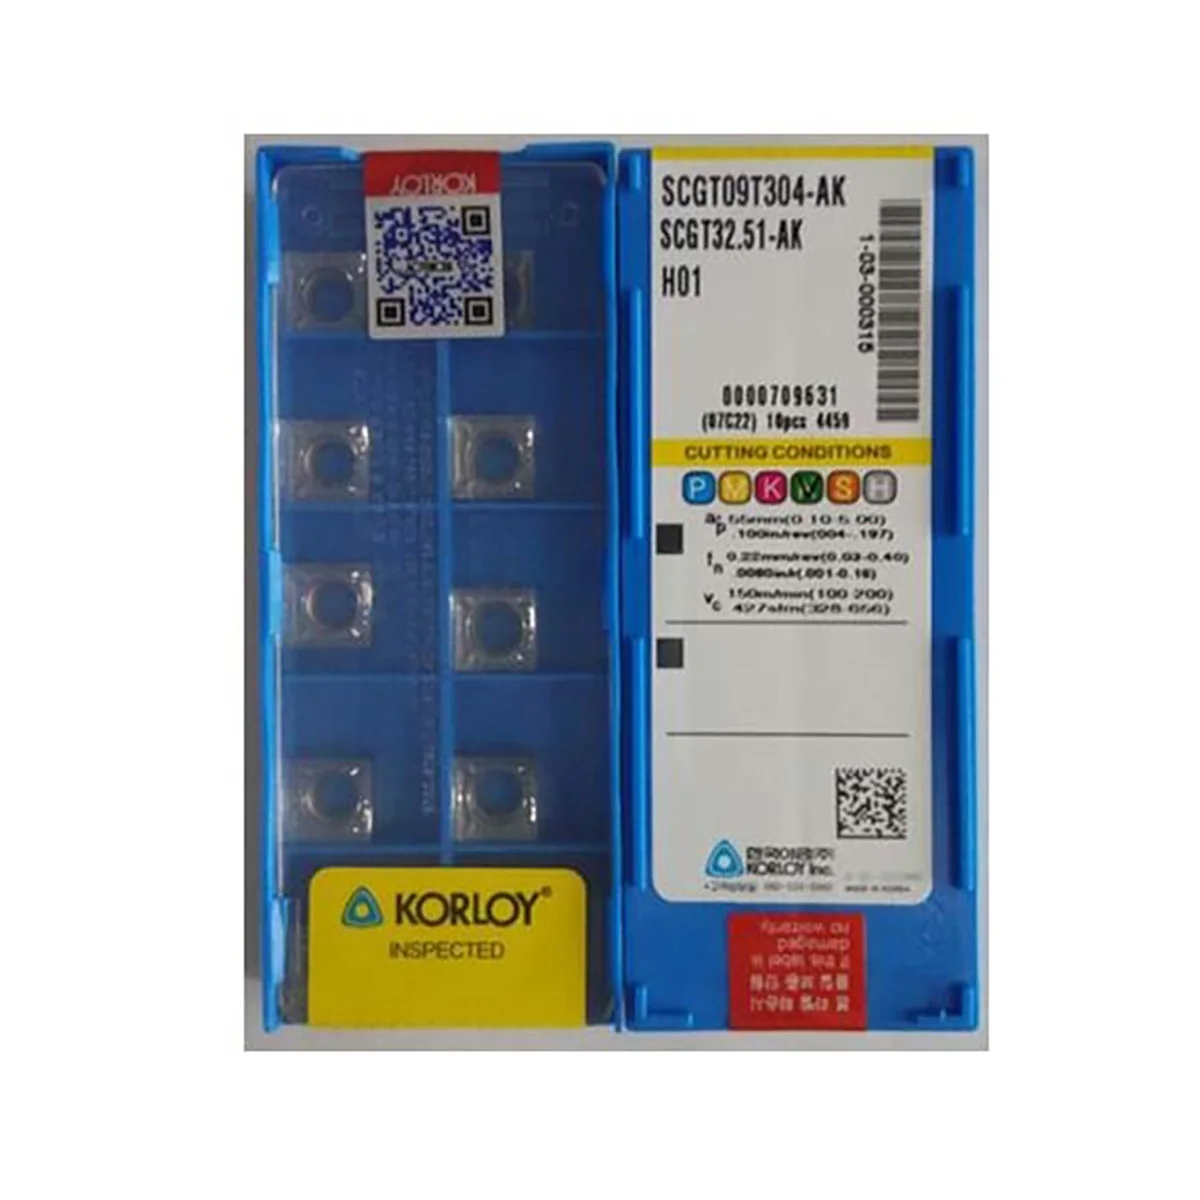 

KORLOY 100% Original SCGT SCGT120404 SCGT120408 SCGT09T304 SCGT09T308 AK H01 Finishing Carbide Turning Inserts Milling Cutter